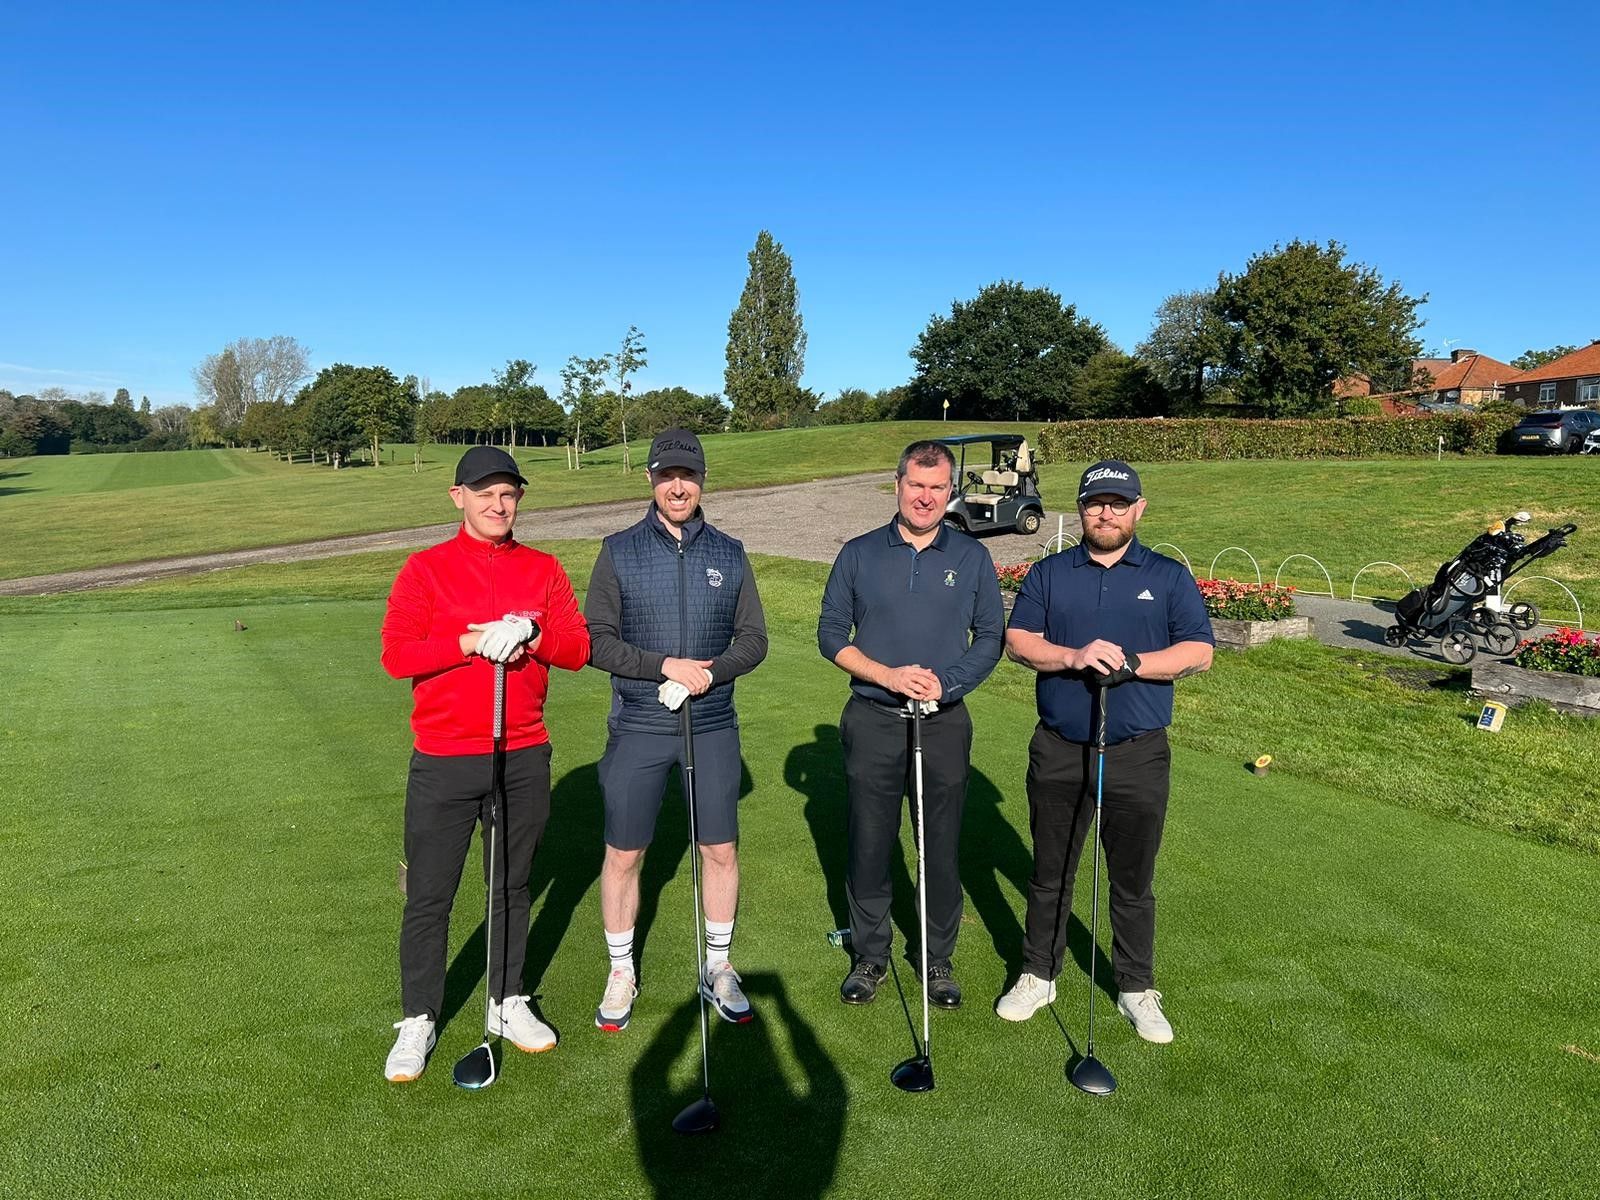 4 men standing for a photo on the golf course